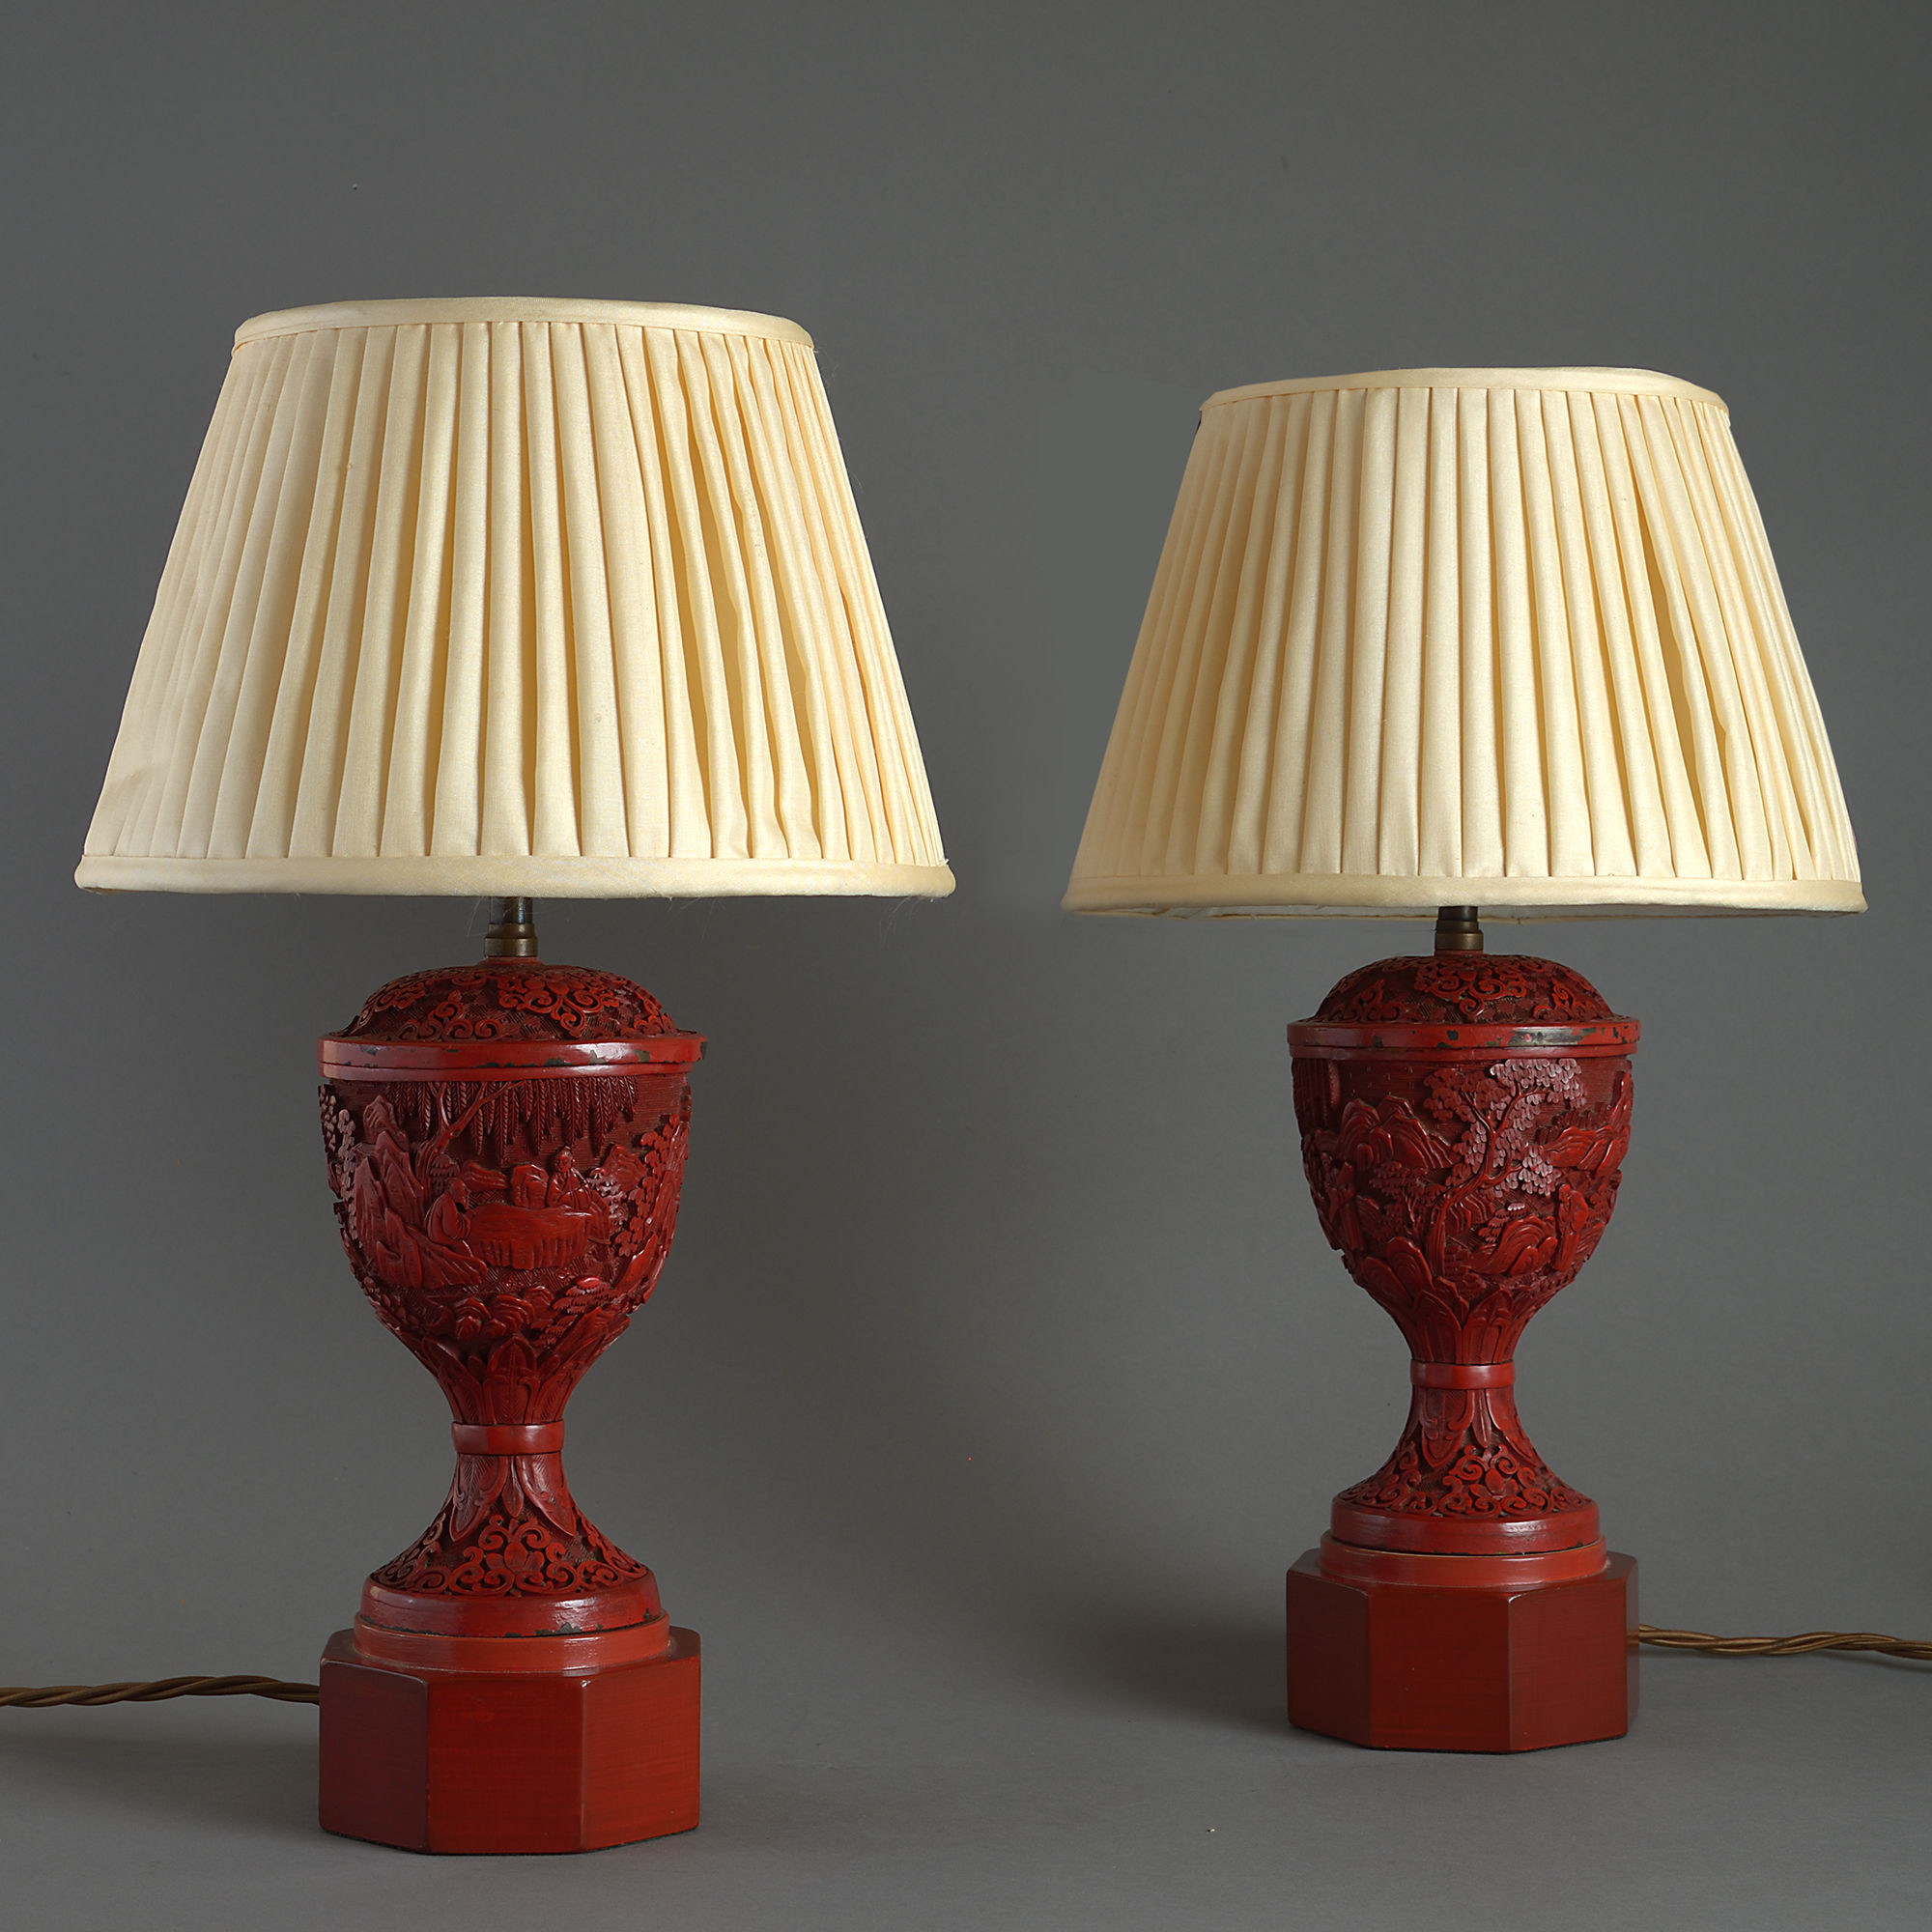 20 Wonderful White Cinnabar Vase 2024 free download white cinnabar vase of a pair of 19th century red cinnabar lacquer vase lamp bases inside a pair of 19th century red cinnabar lacquer vase lamp bases